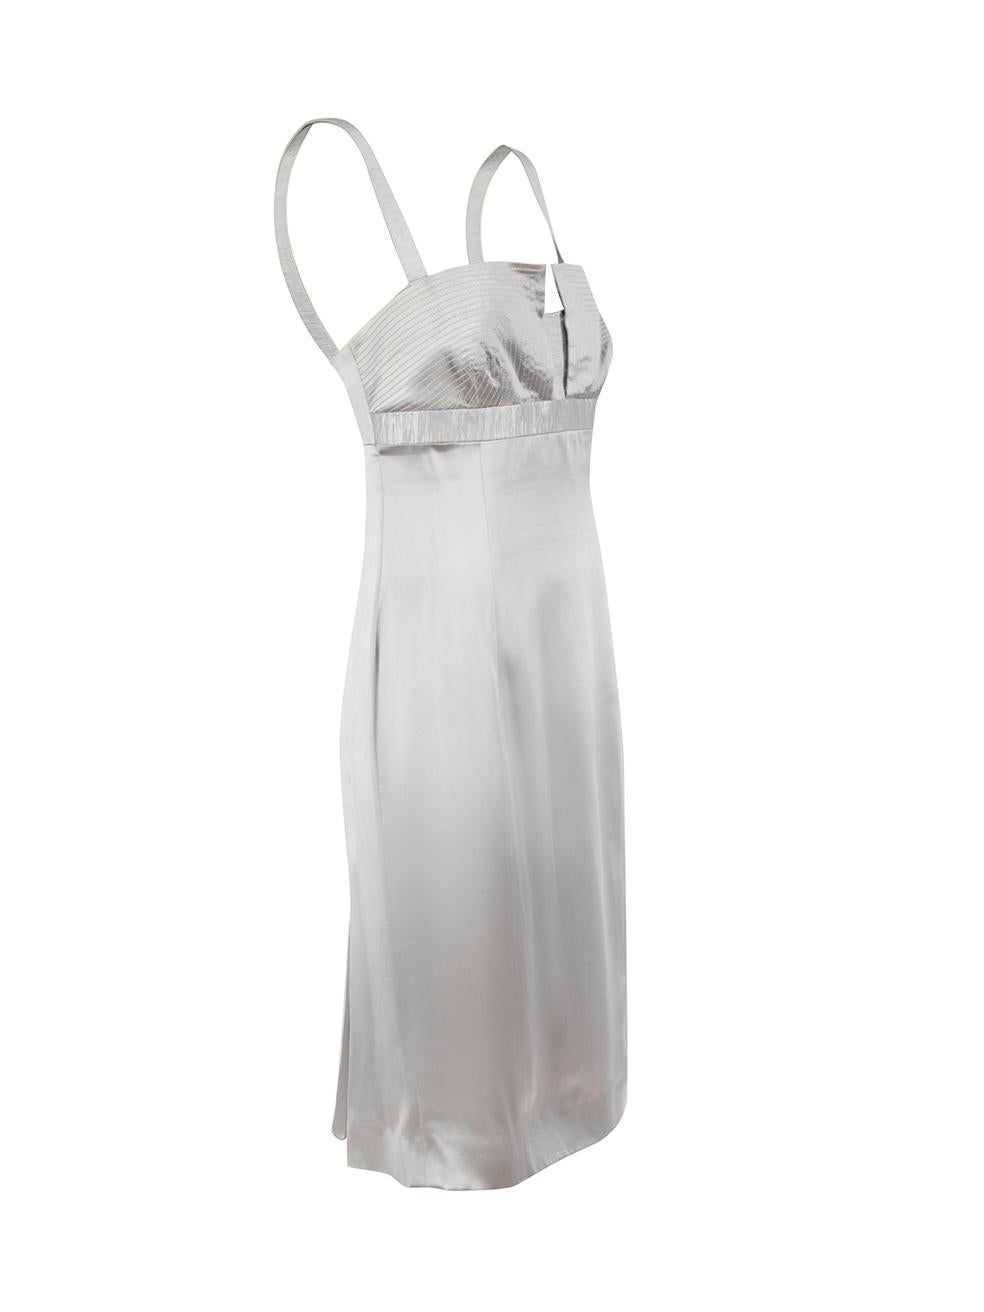 Amanda Wakeley Silver Silk Embroidered Dress Size XL In Excellent Condition For Sale In London, GB